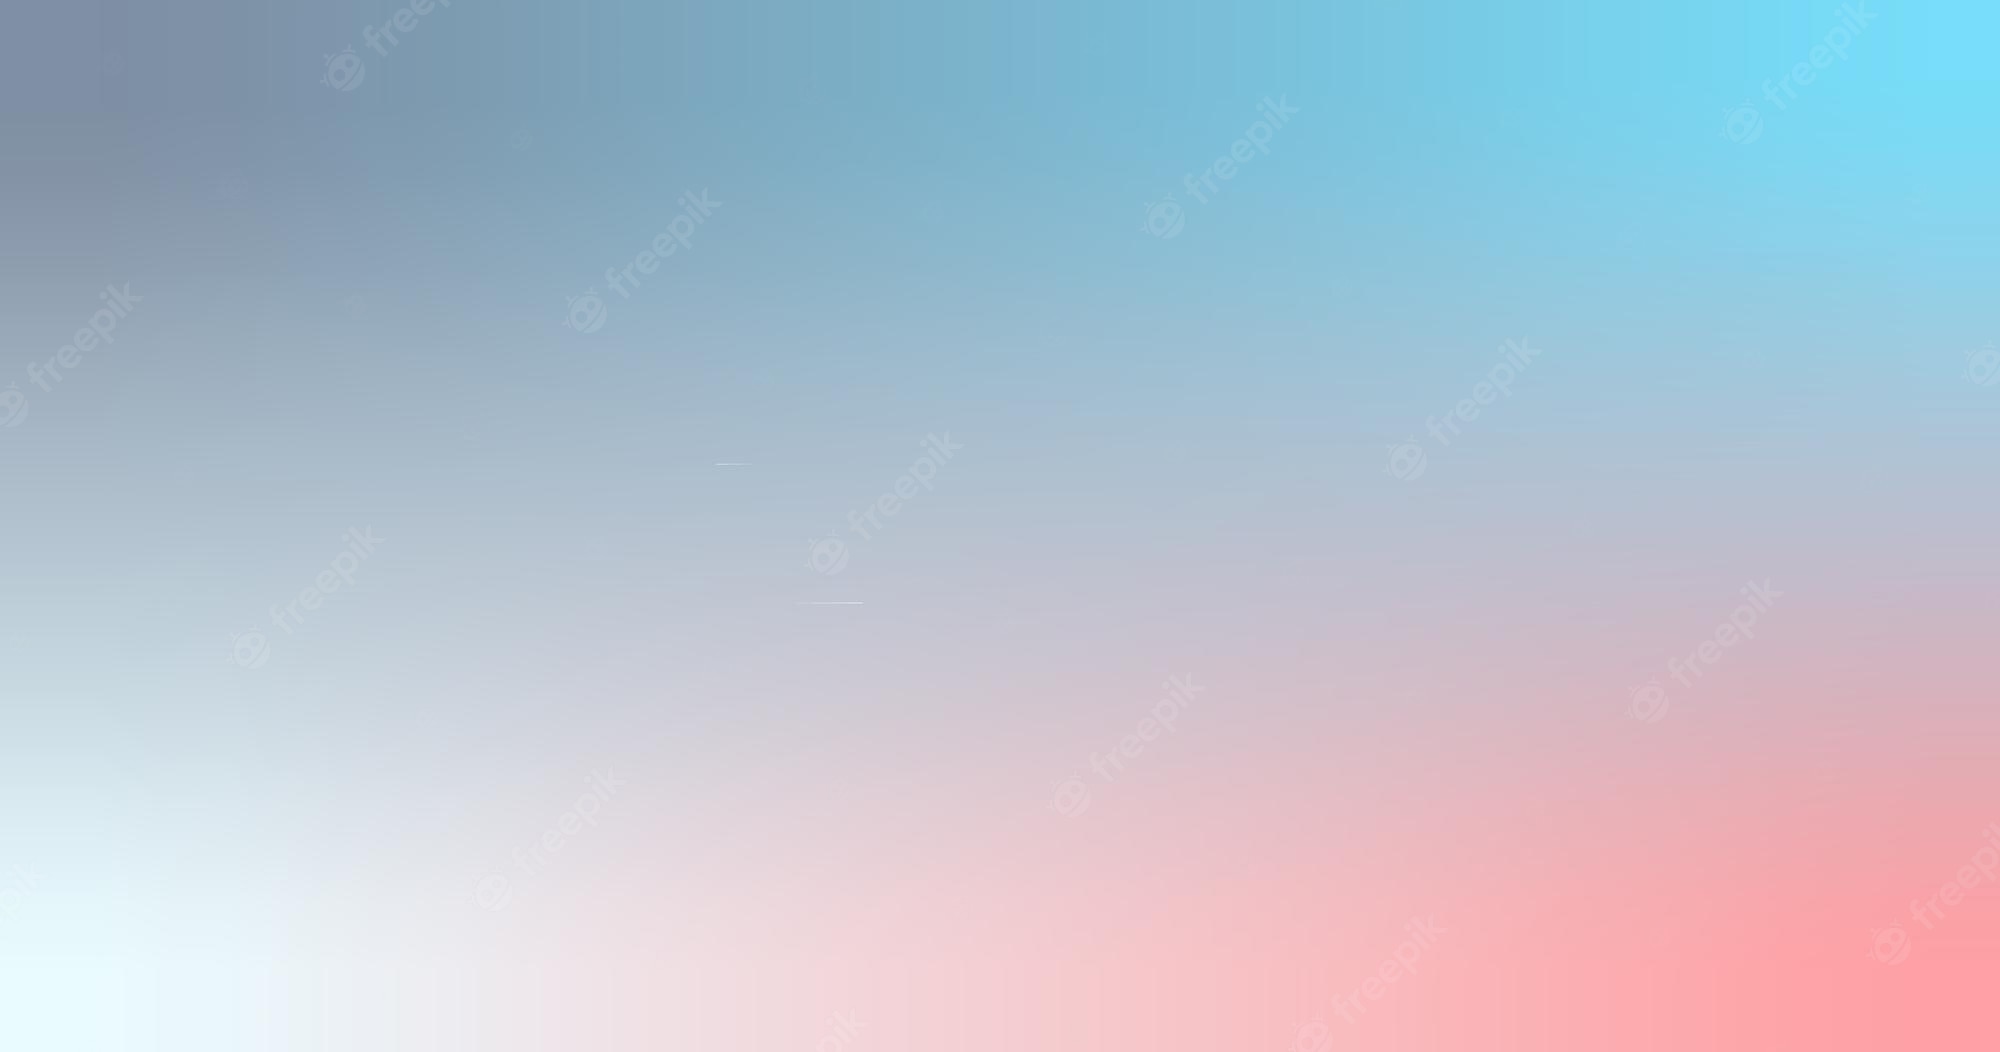 Premium Vector. Blue gray, baby blue, coral, turquoise gradient wallpaper background vector illustration